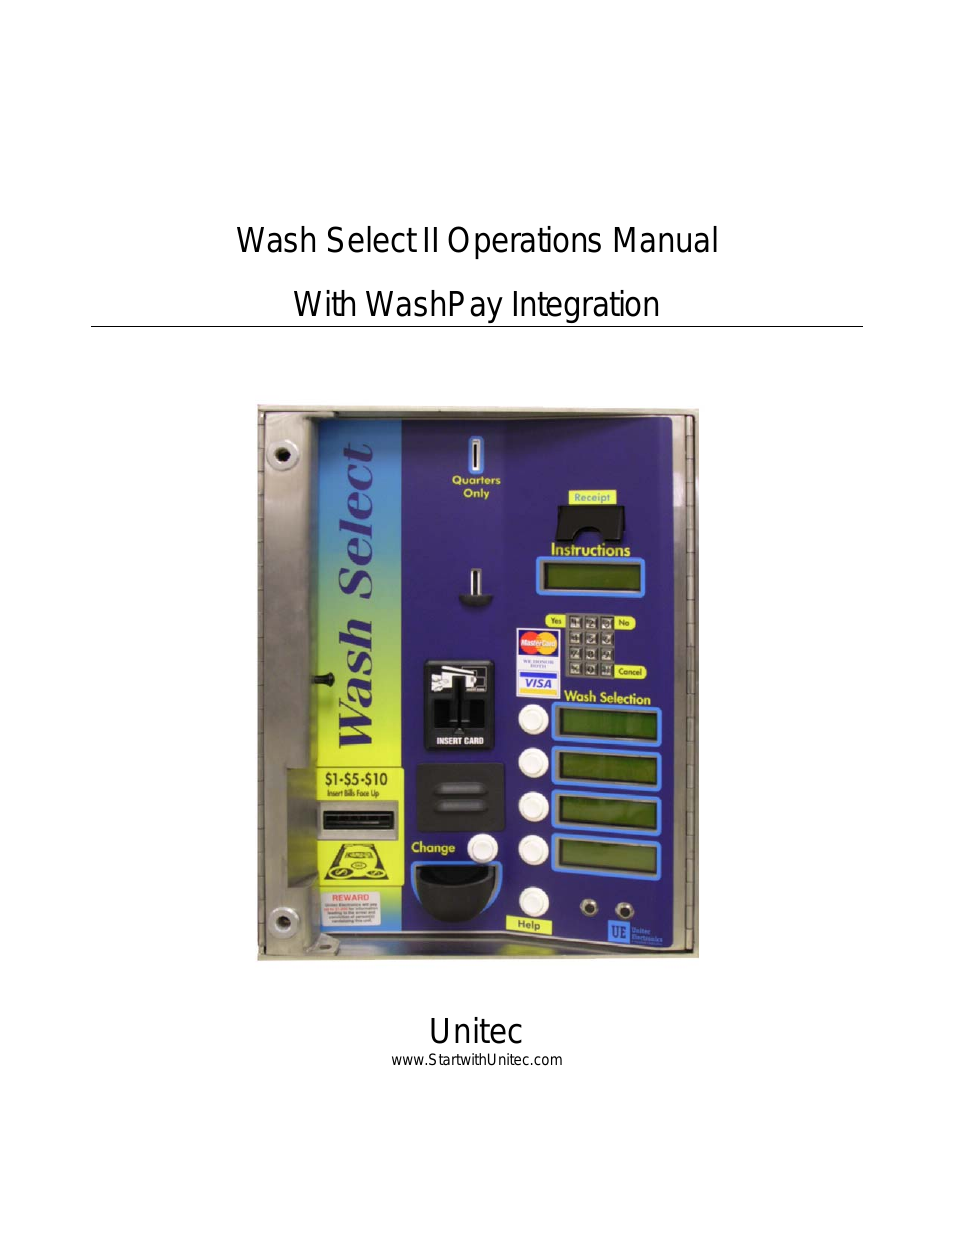 Wash Select II With WashPay Integration Operations Manual